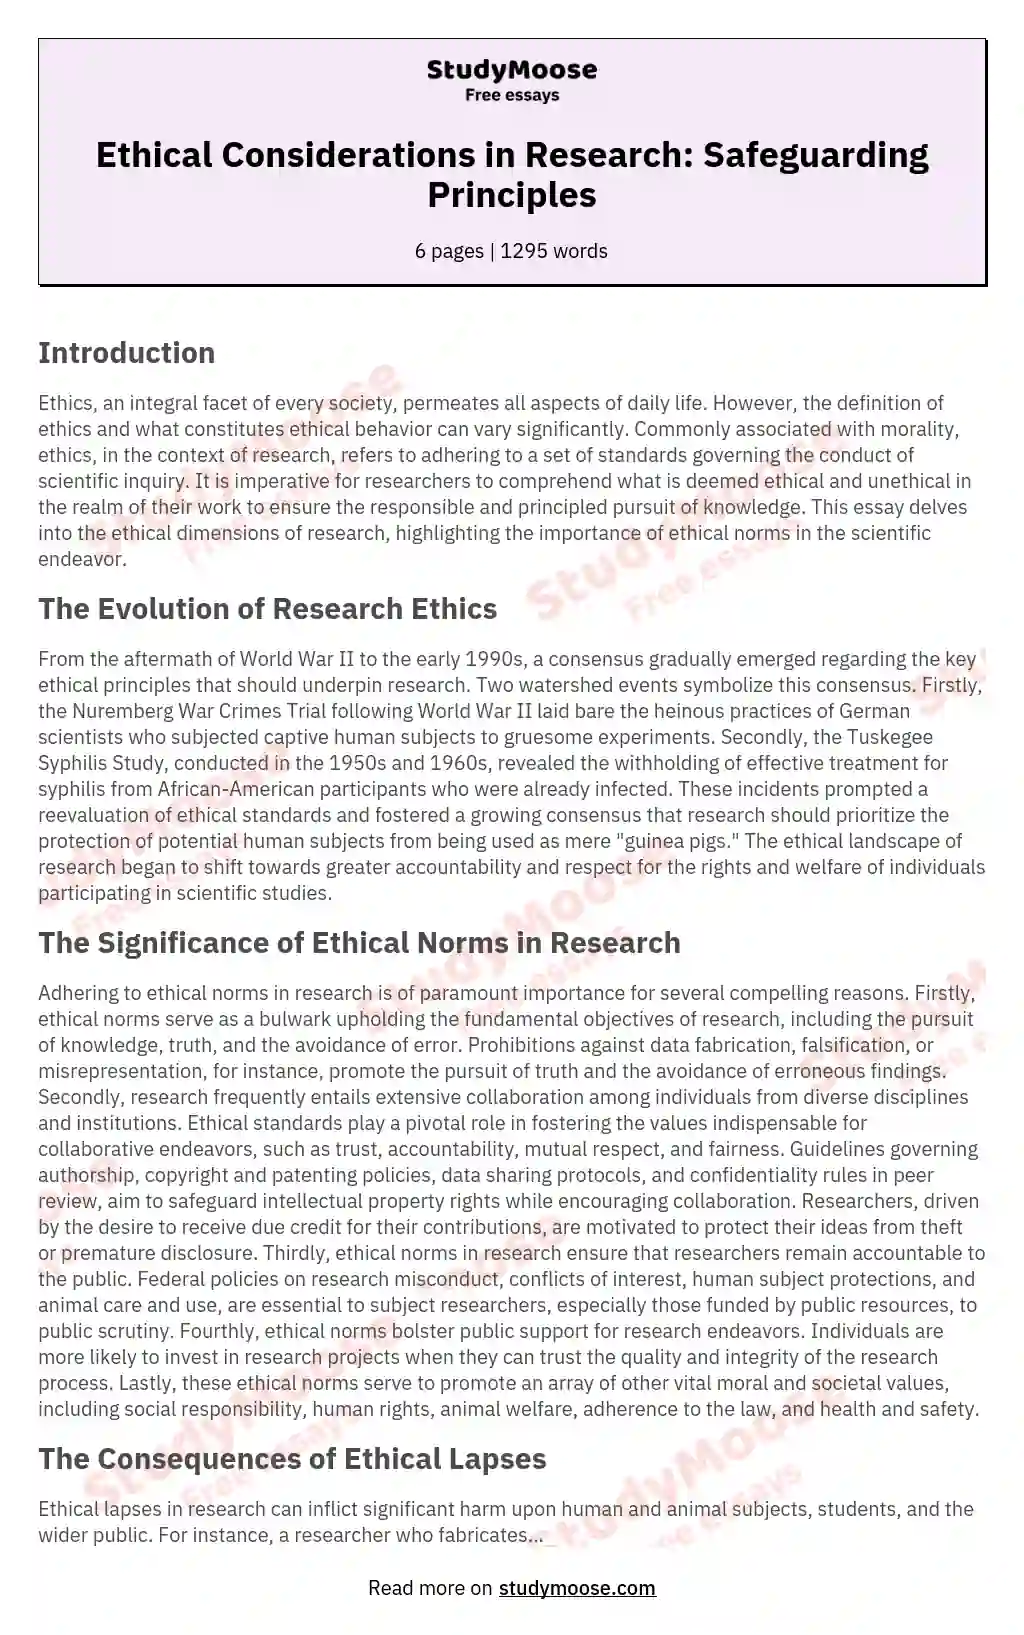 essay of ethical principles